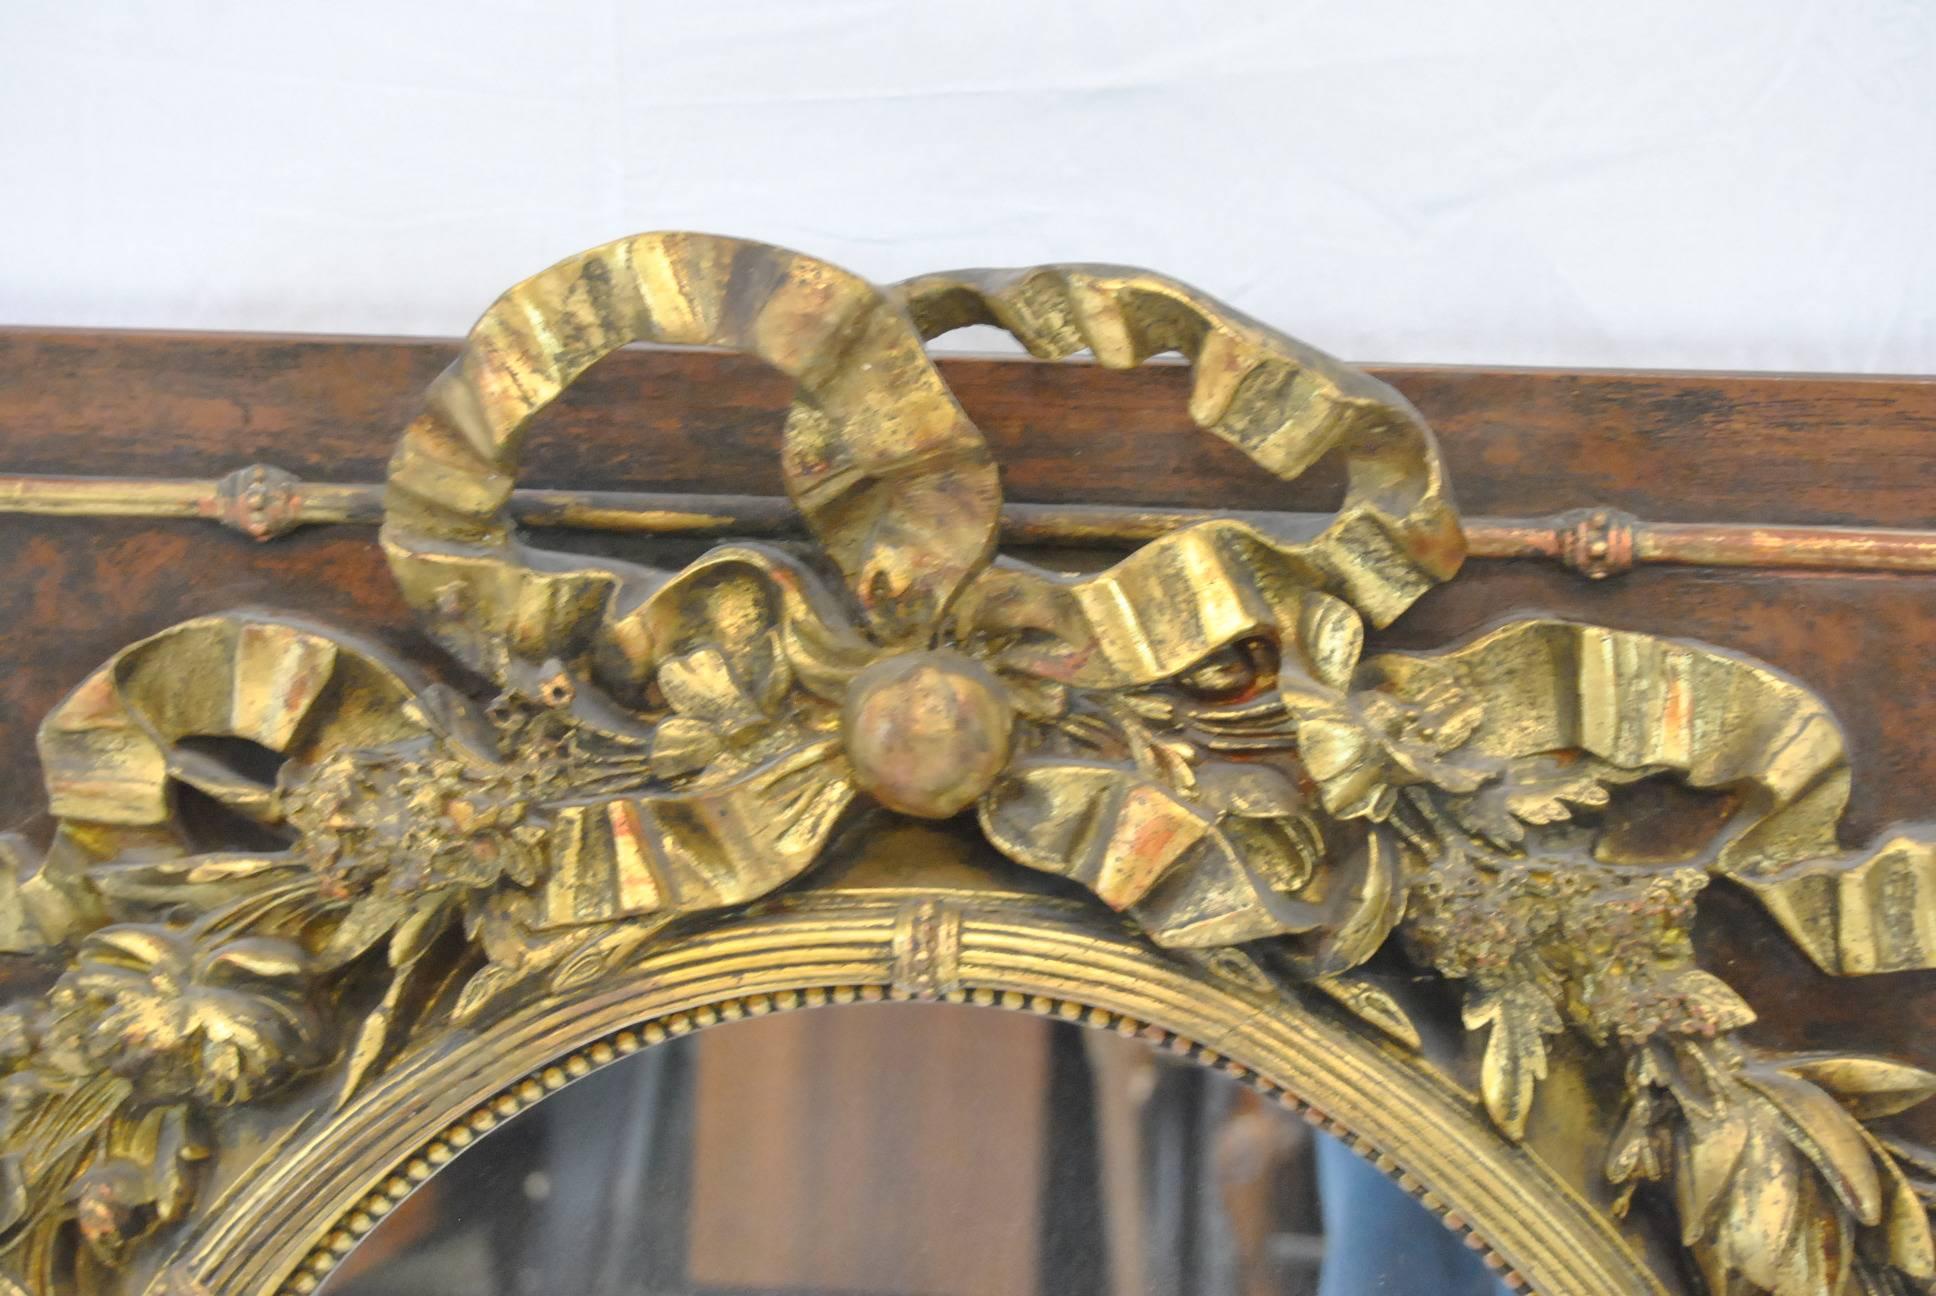 A very unusual Victorian mirror. Mirror is attached to a square frame with brass edge detail. The oval mirror is a golden floral wreath done in high relief with a central bow at top. The mirror is 21